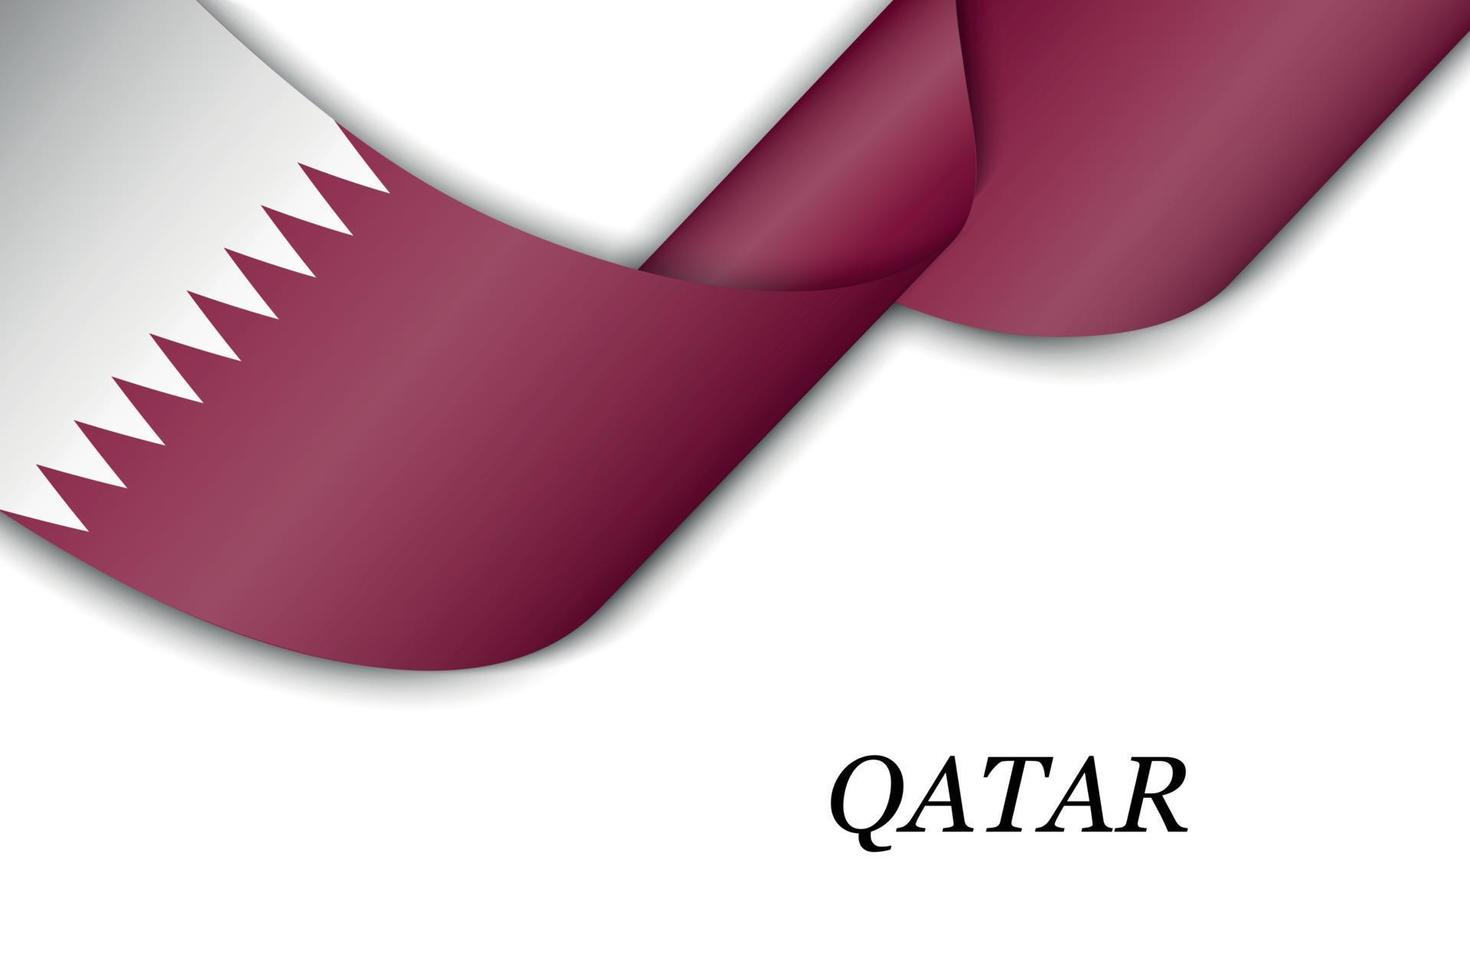 Waving ribbon or banner with flag of Qatar vector